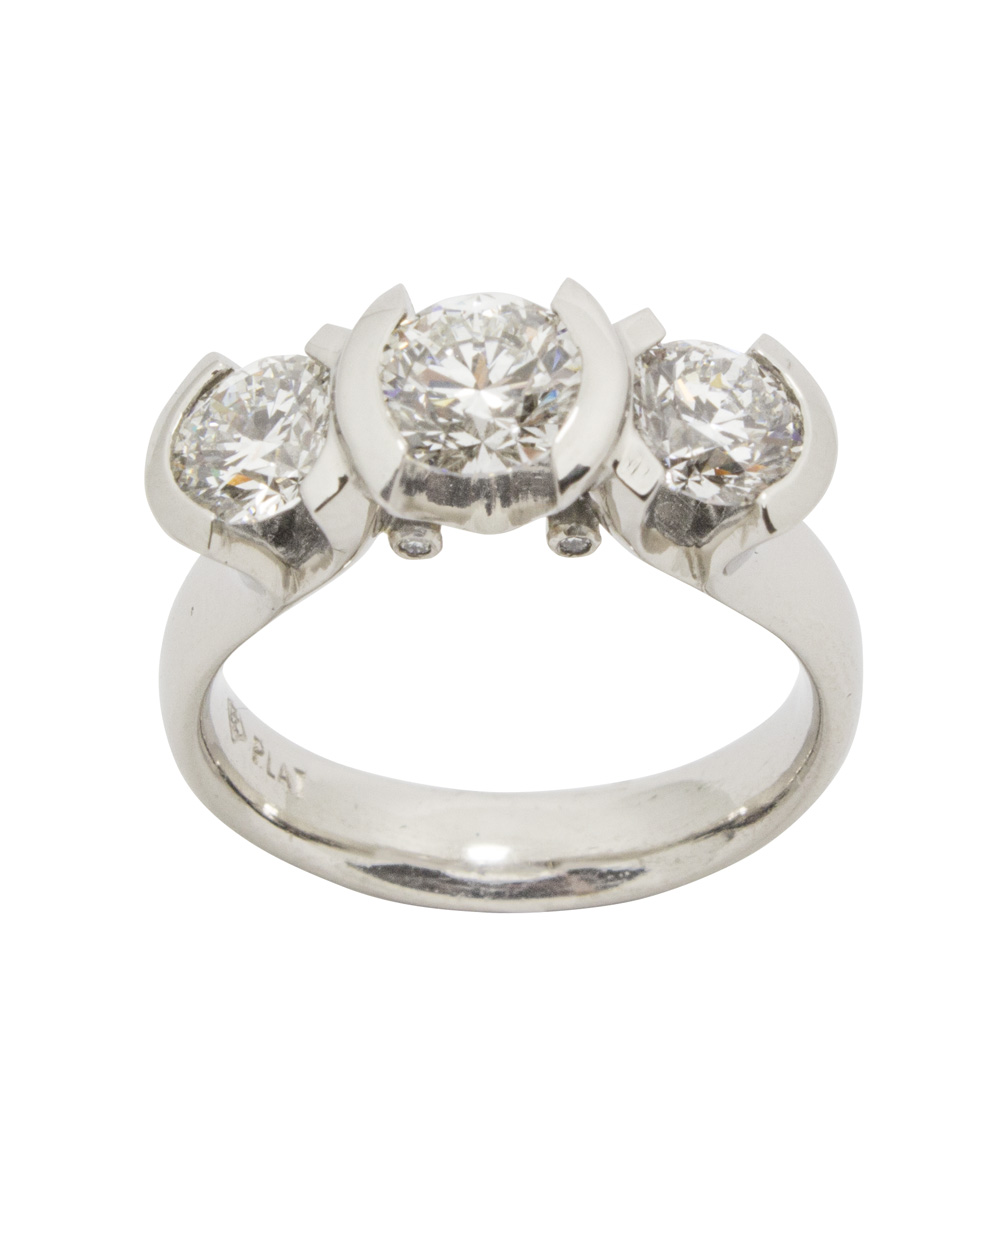 Ring, $25,000, by Goldsmith Gallery Designer Jewellers.